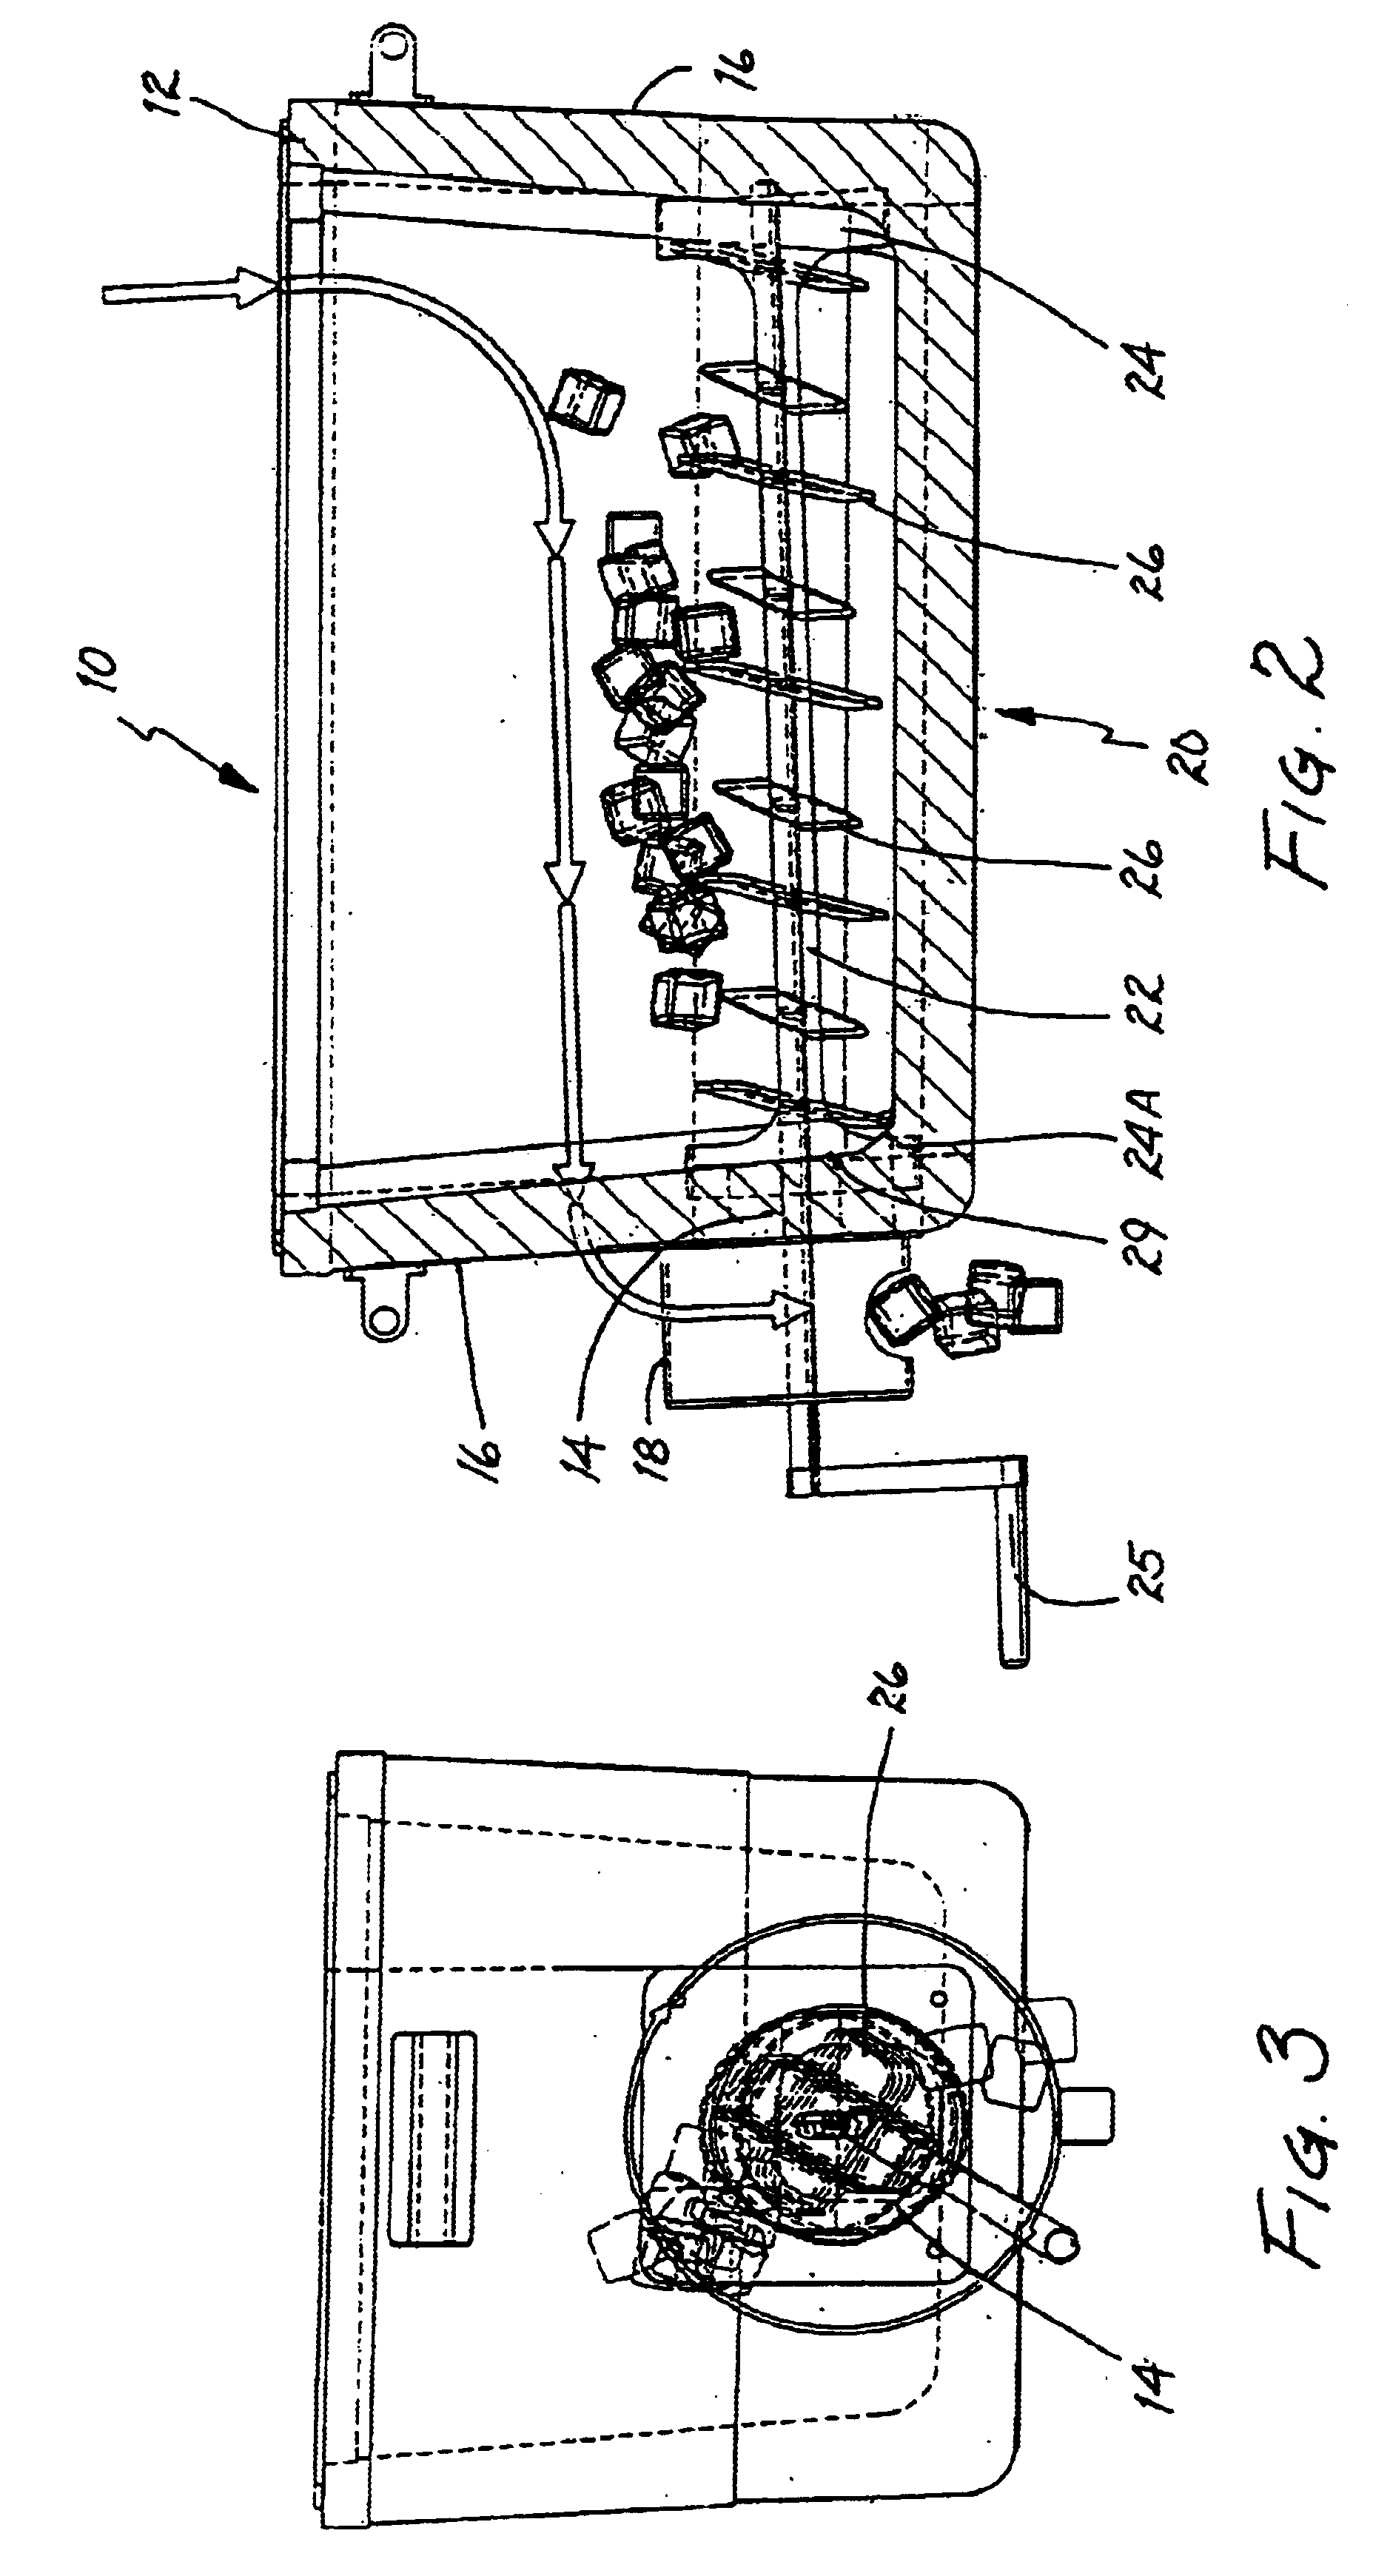 Portable ice storage container having an ice dispenser device and method therefor